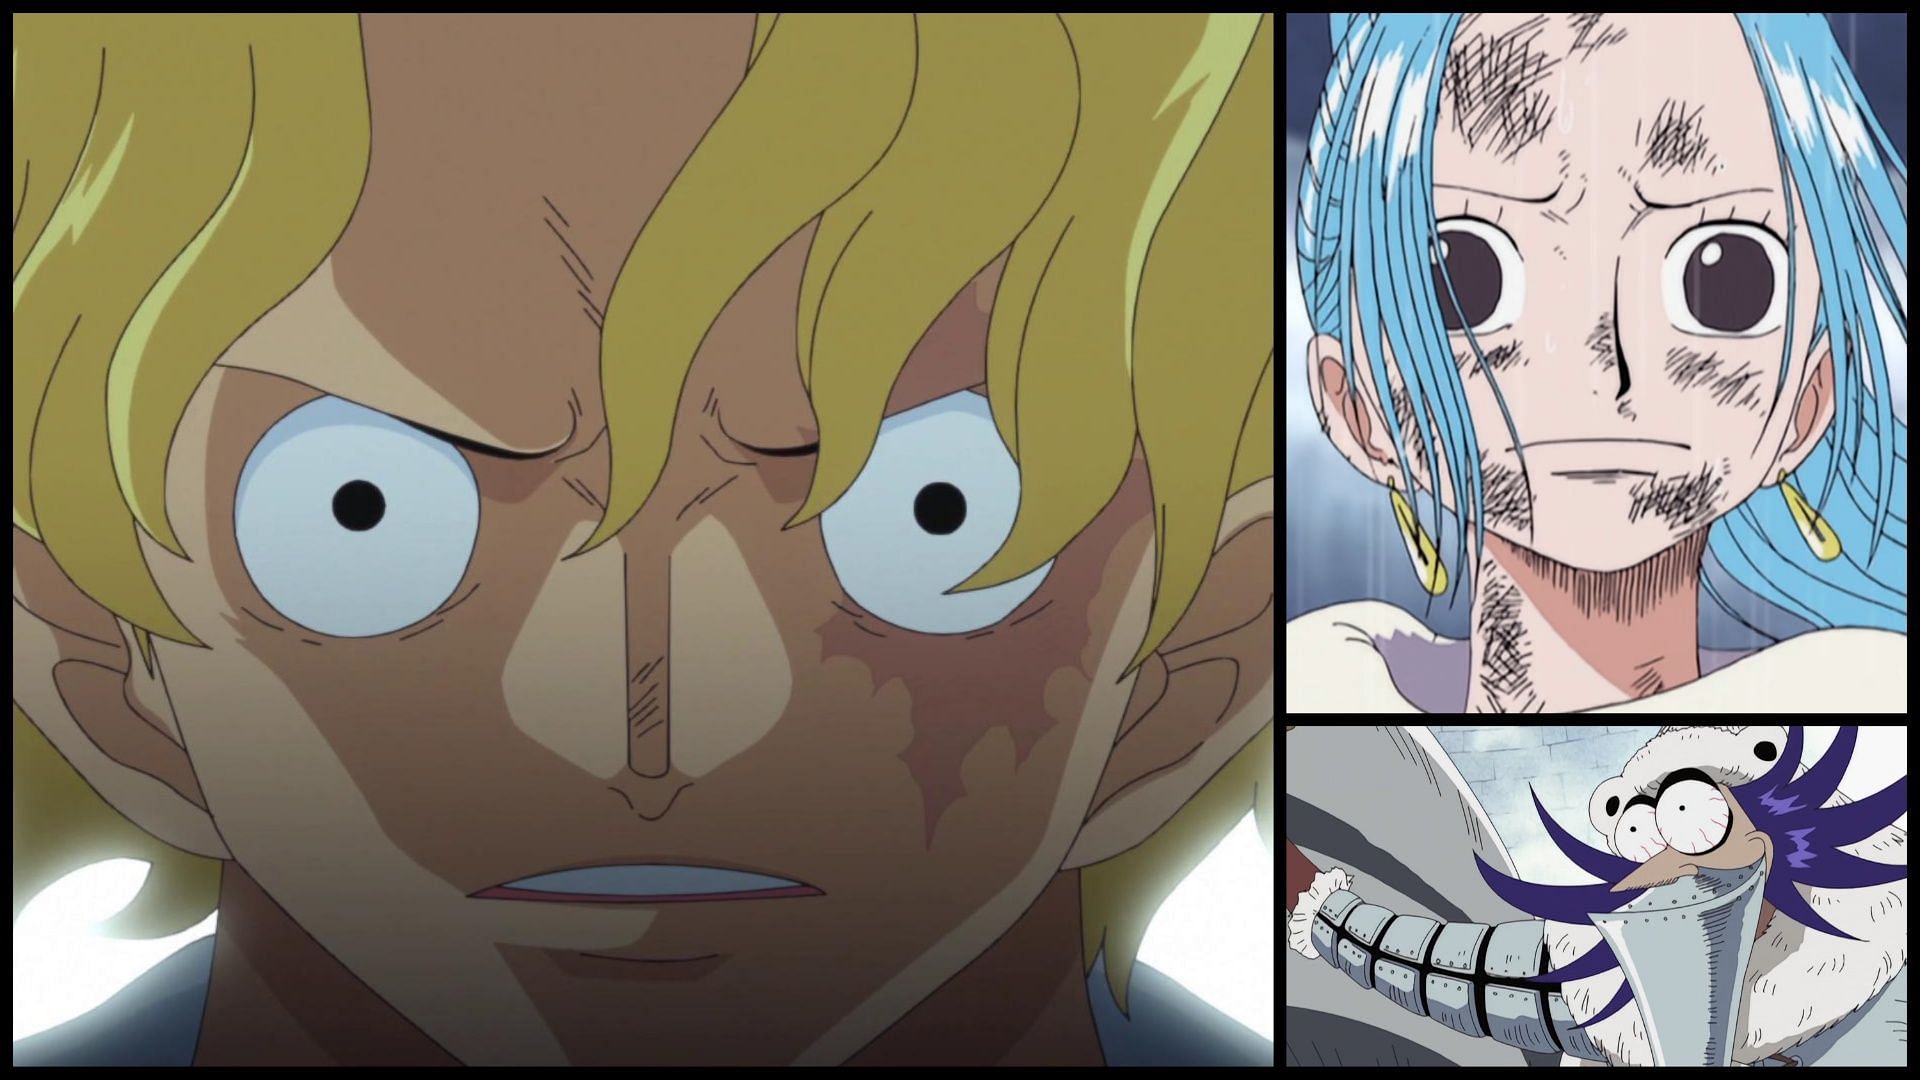 Sabo, Vivi, and Wapol narrowly survive encounters with high-up World Government officials in One Piece Chapter 1085 (Image via Sportskeeda)